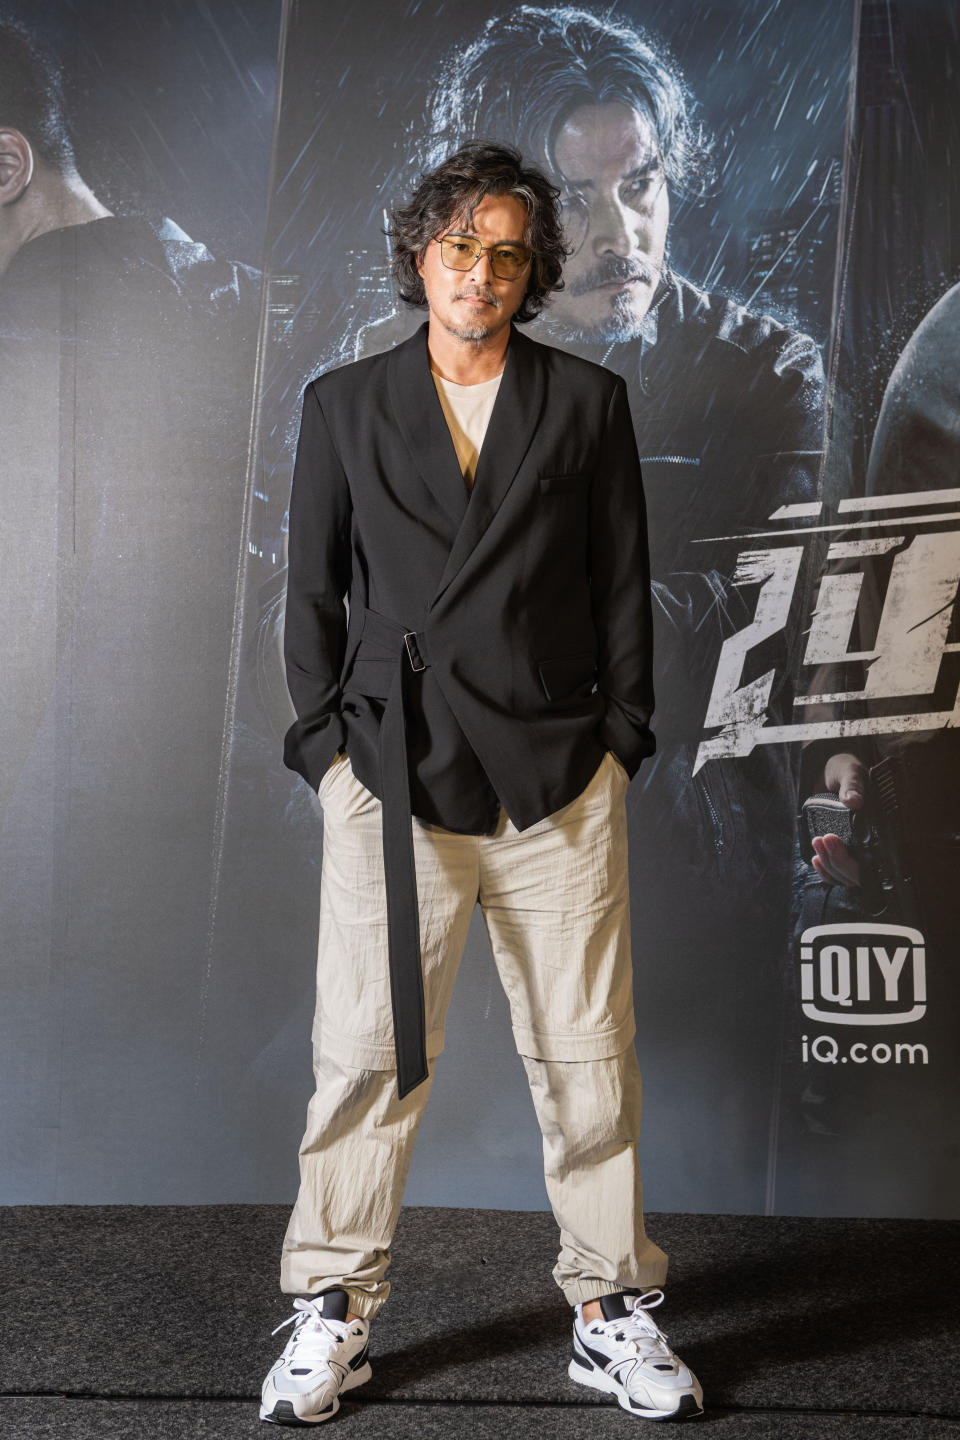 Actor Christopher Lee at a press conference in Taipei, Taiwan for iQiyi series Danger Zone on 1 September 2021. (Photo: iQiyi)